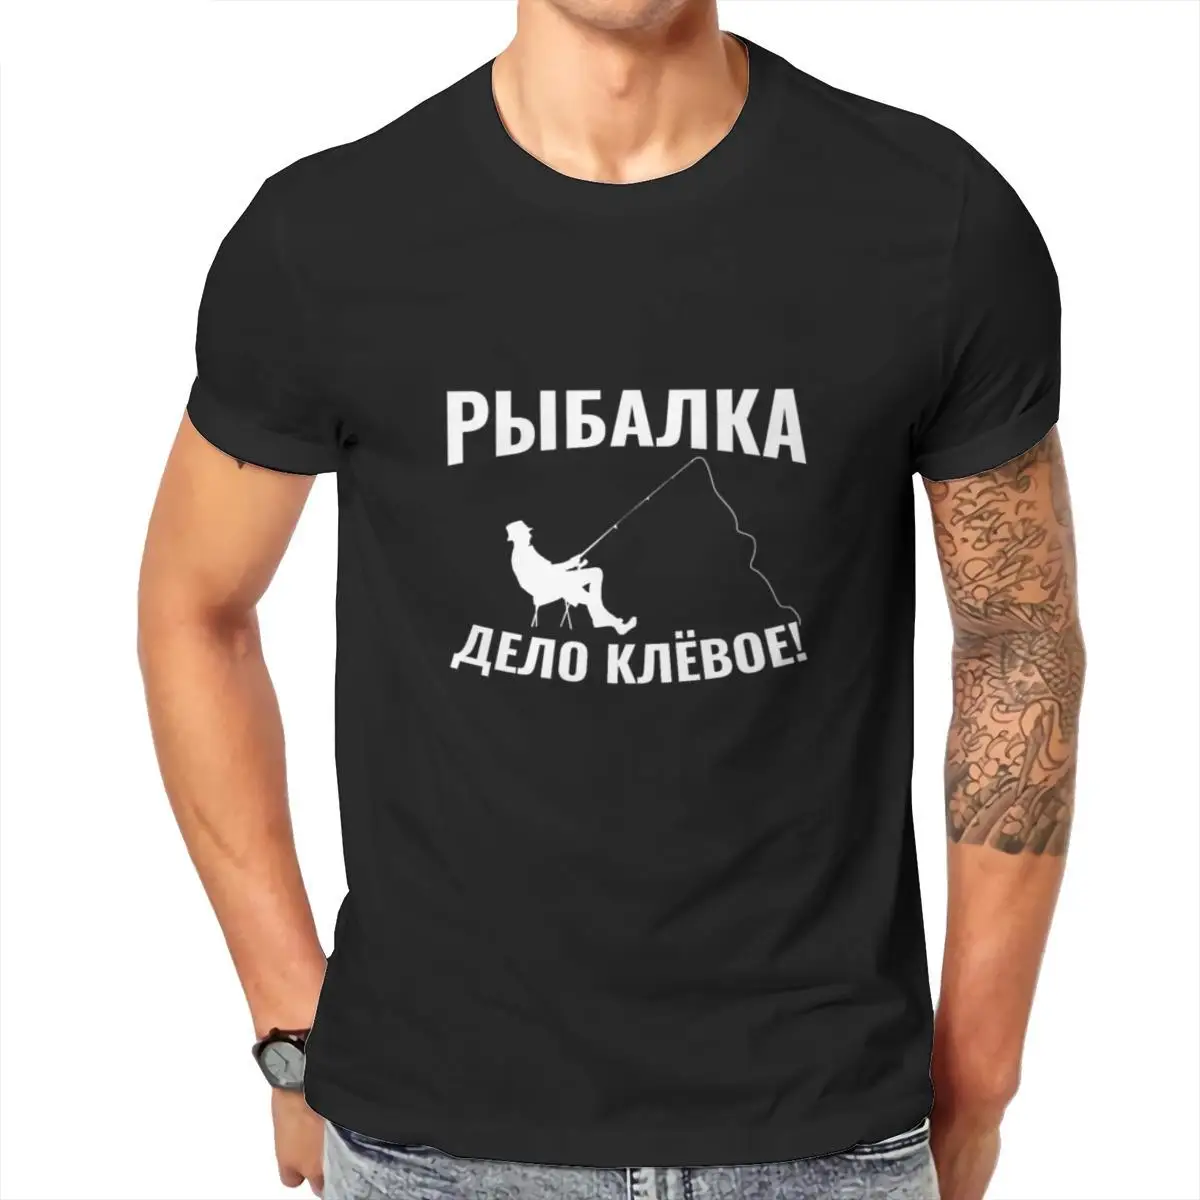 

Wholesale Cyrillic Рыбак Russian Angler Russian Fish Catcher Games ShortSleeve Unisex Fitness Men's Clothing 124712